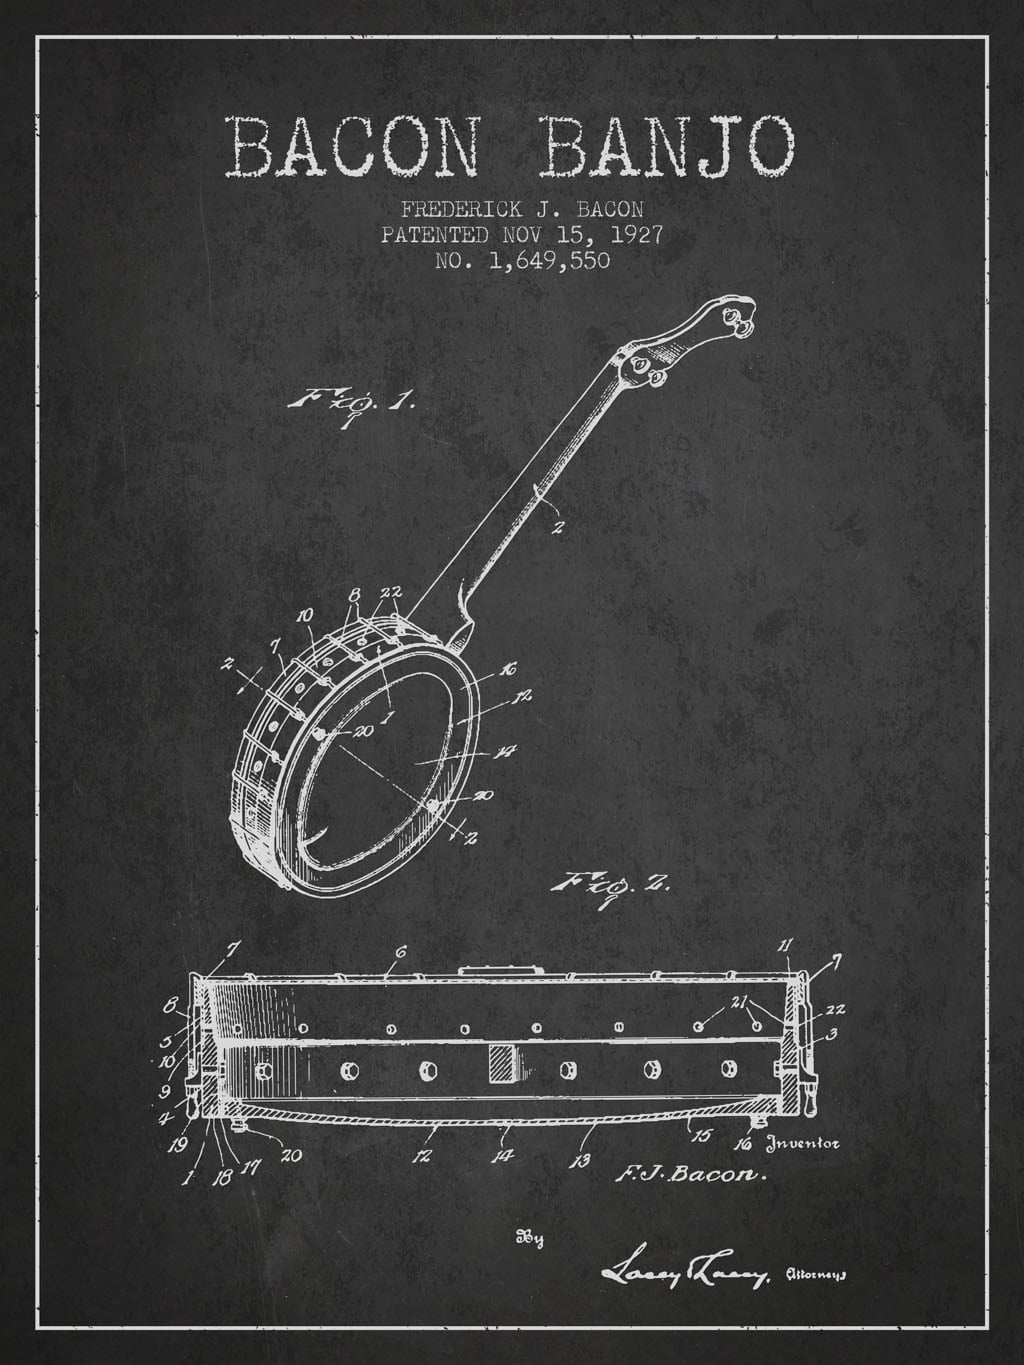 Up Your Wall Art Game With These Banjo Patent Prints